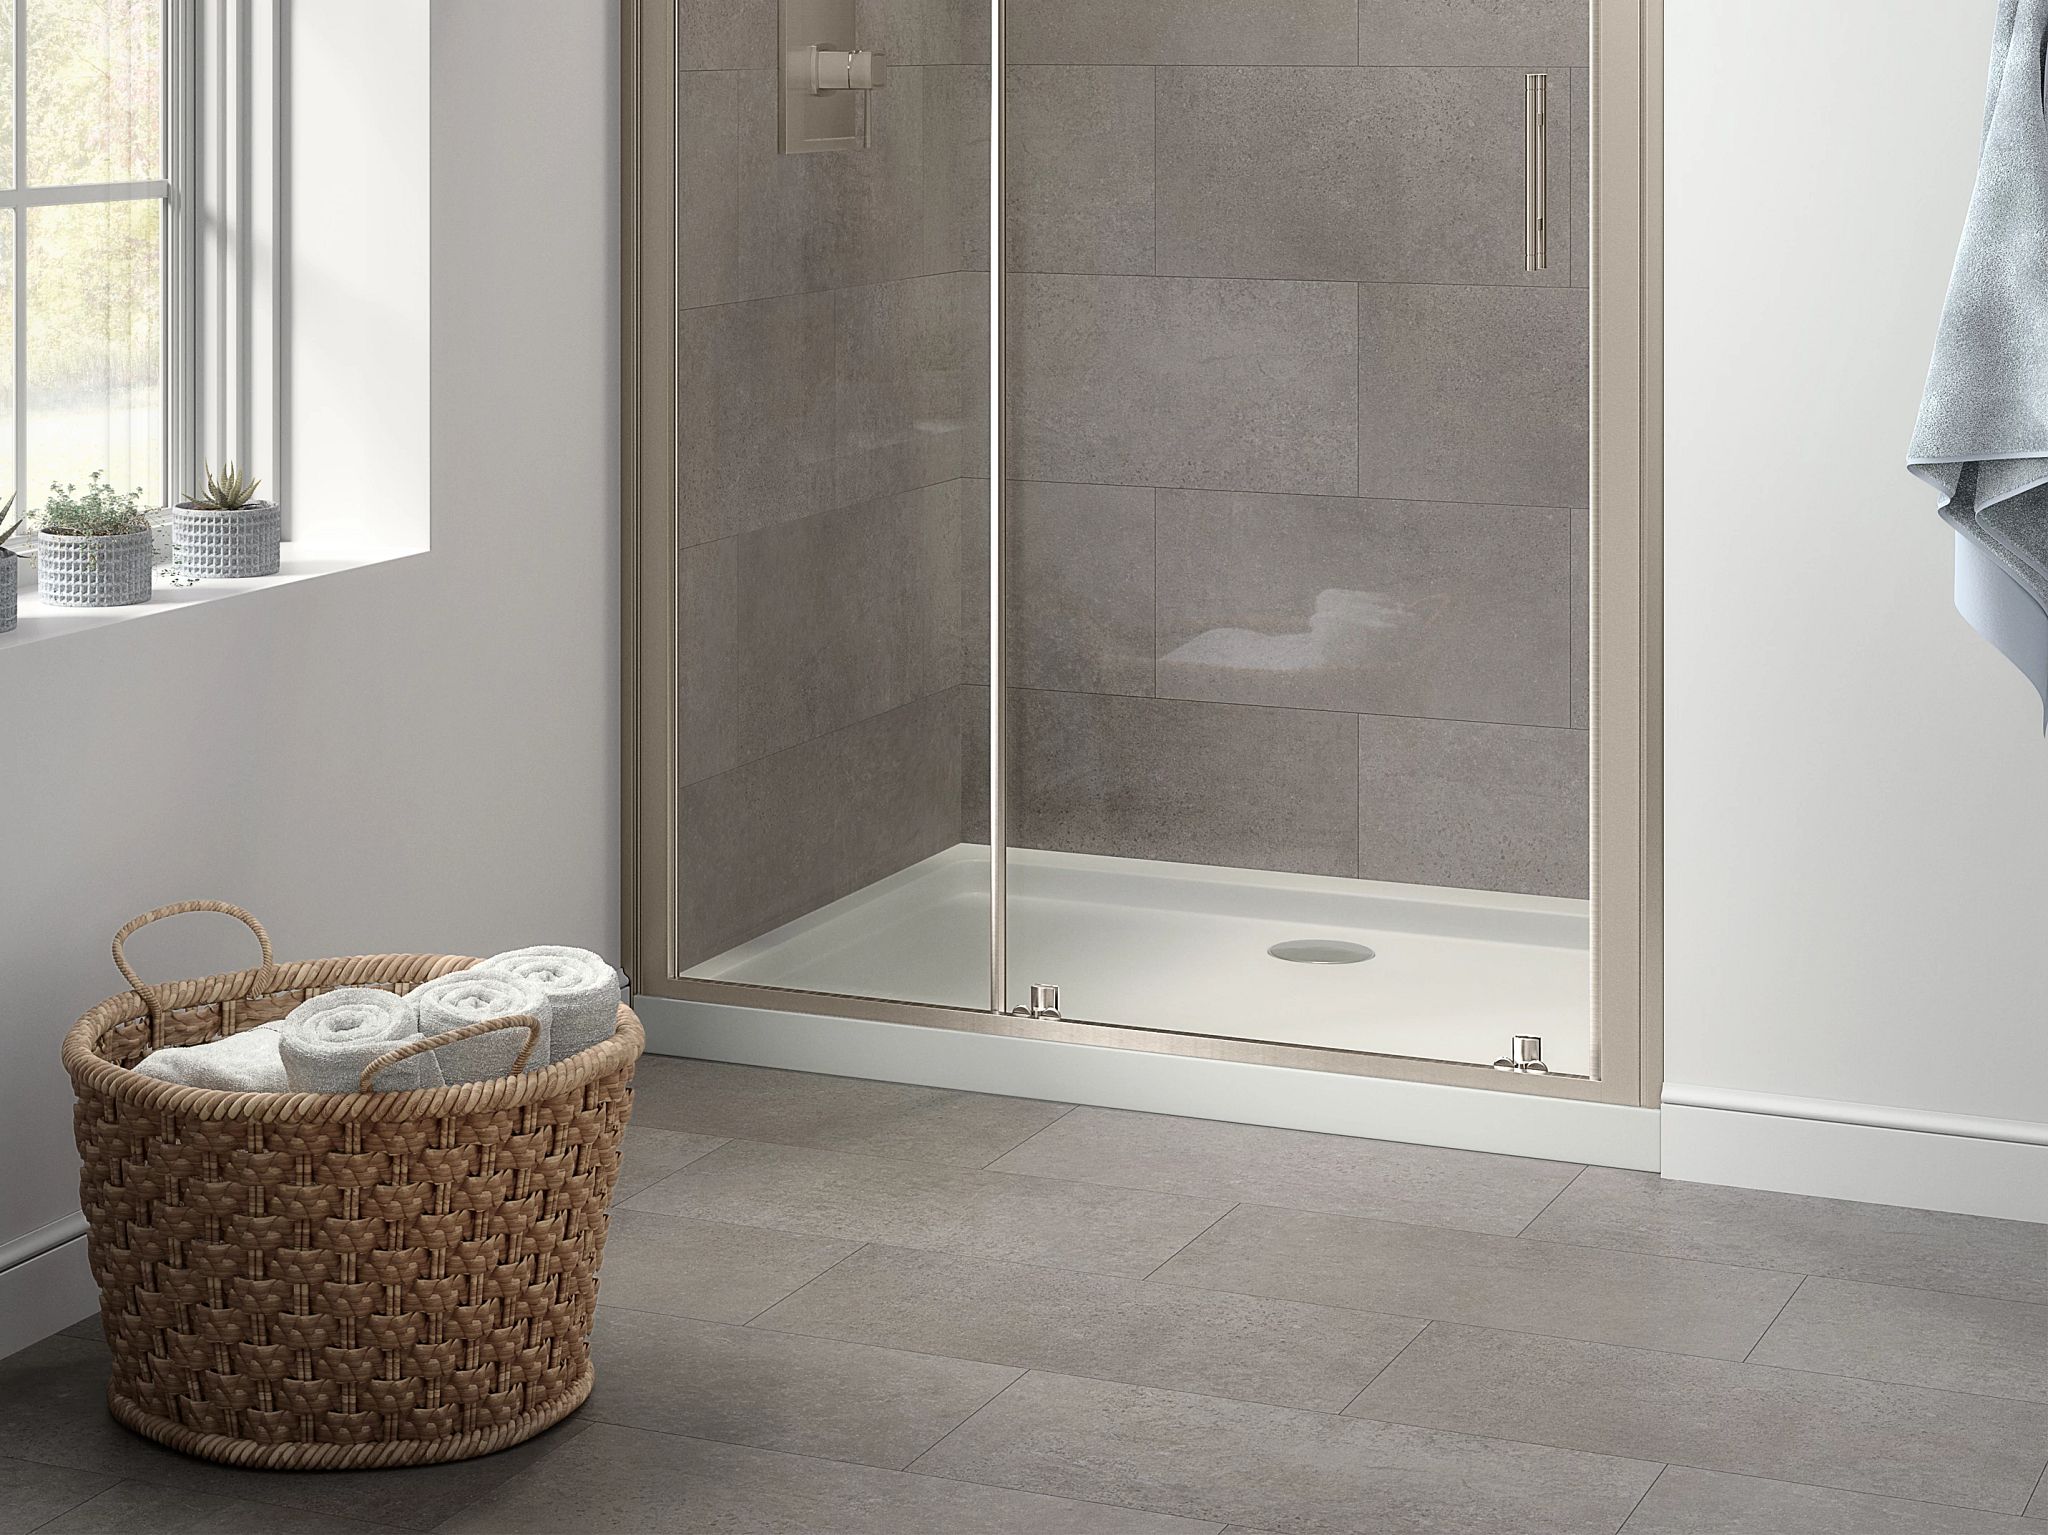 Floorté wall product in a shower